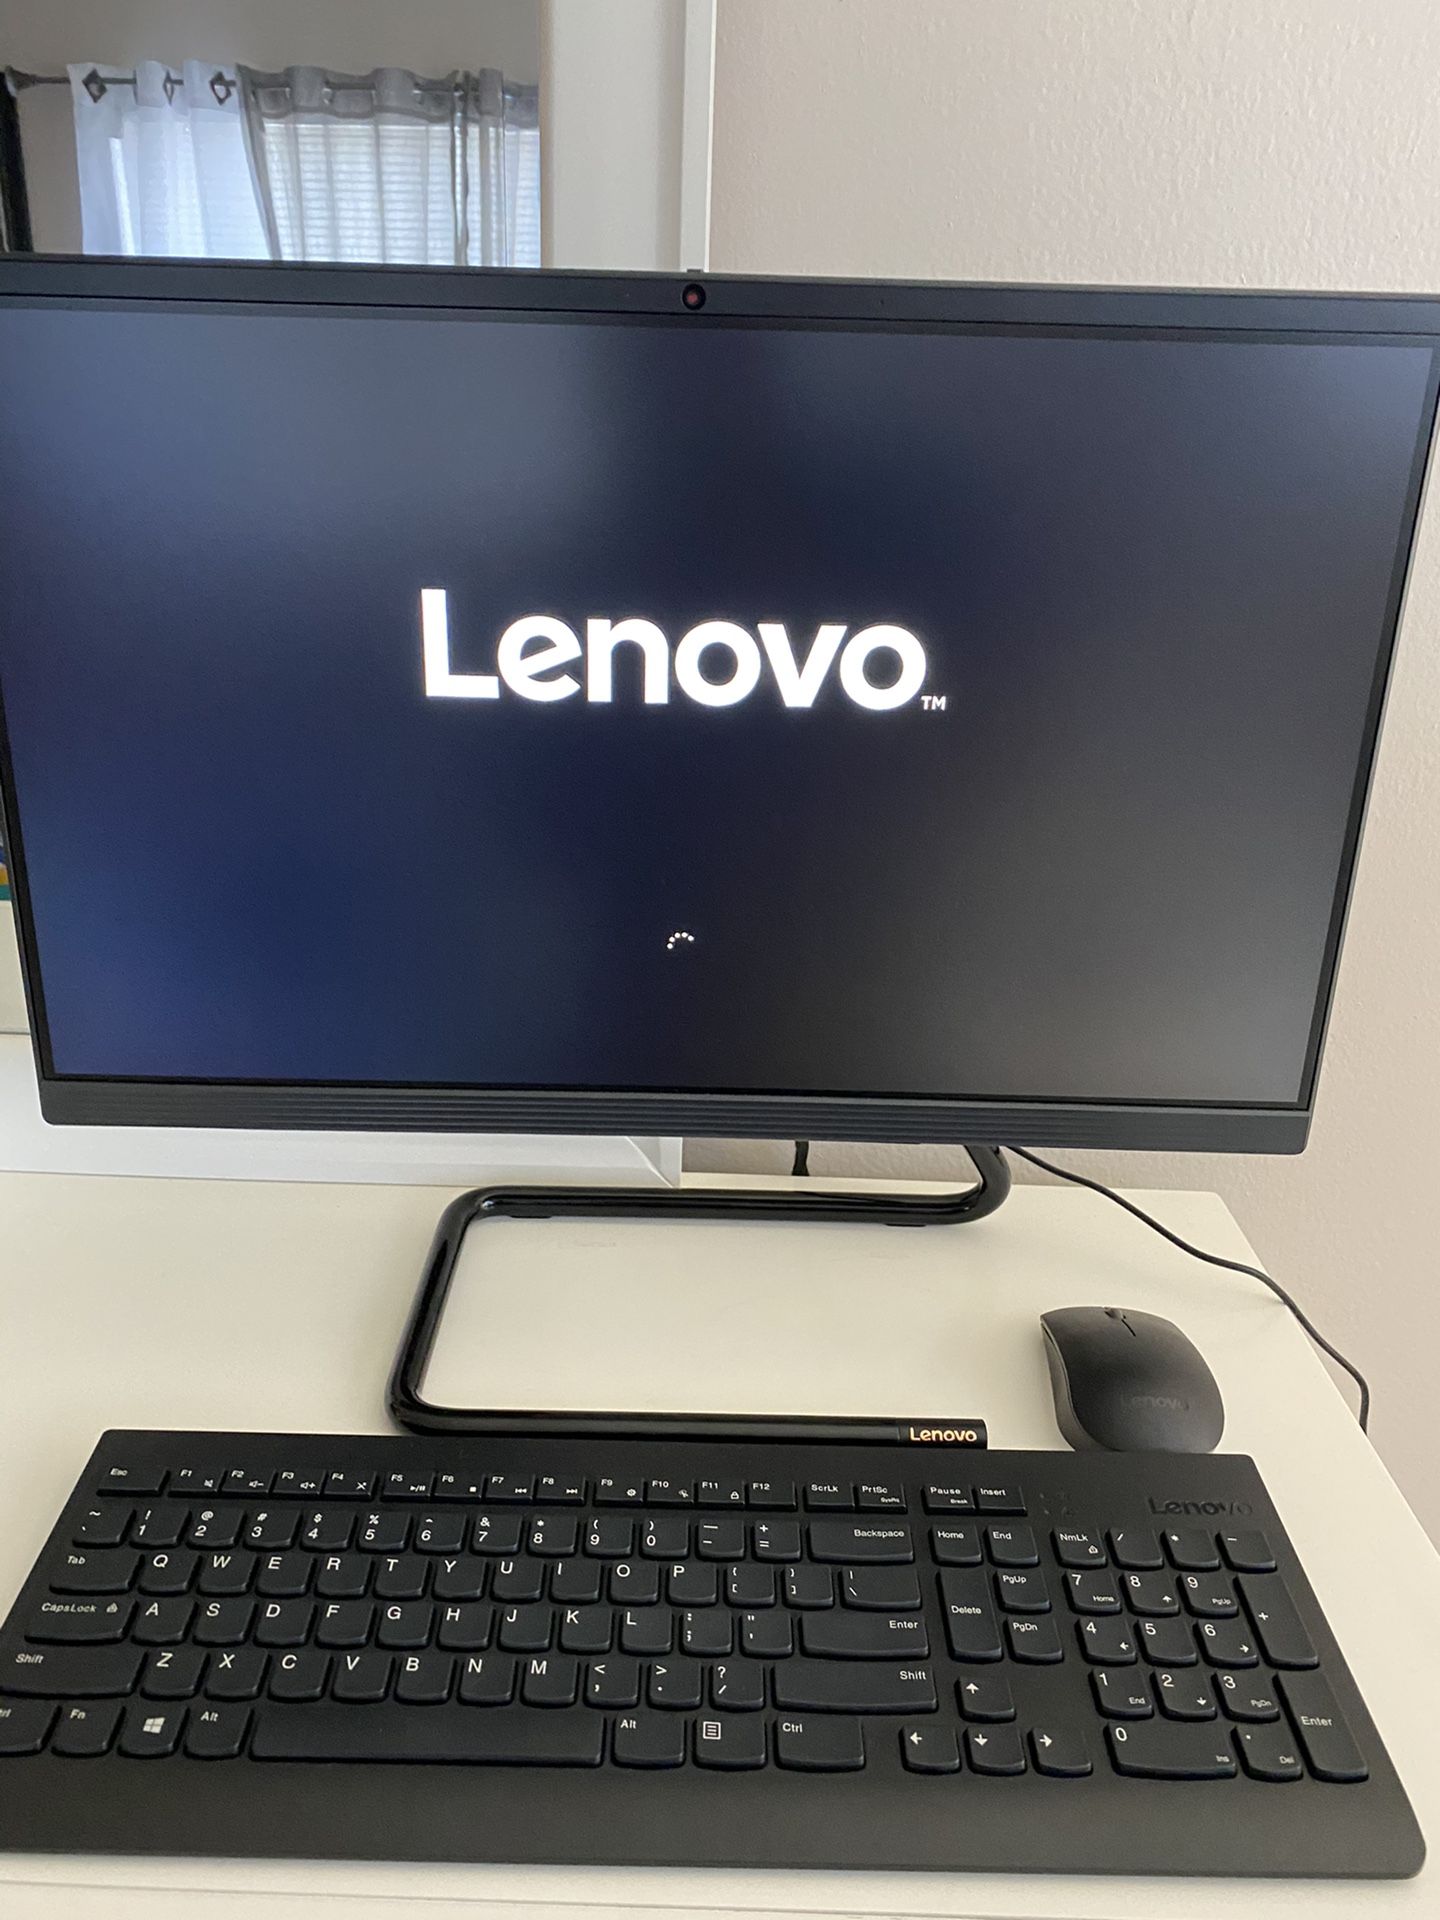 LENOVO DESKTOP COMPUTER TOUCH SCREEN AND WIRELESS KEYBOARD AND MOUSE